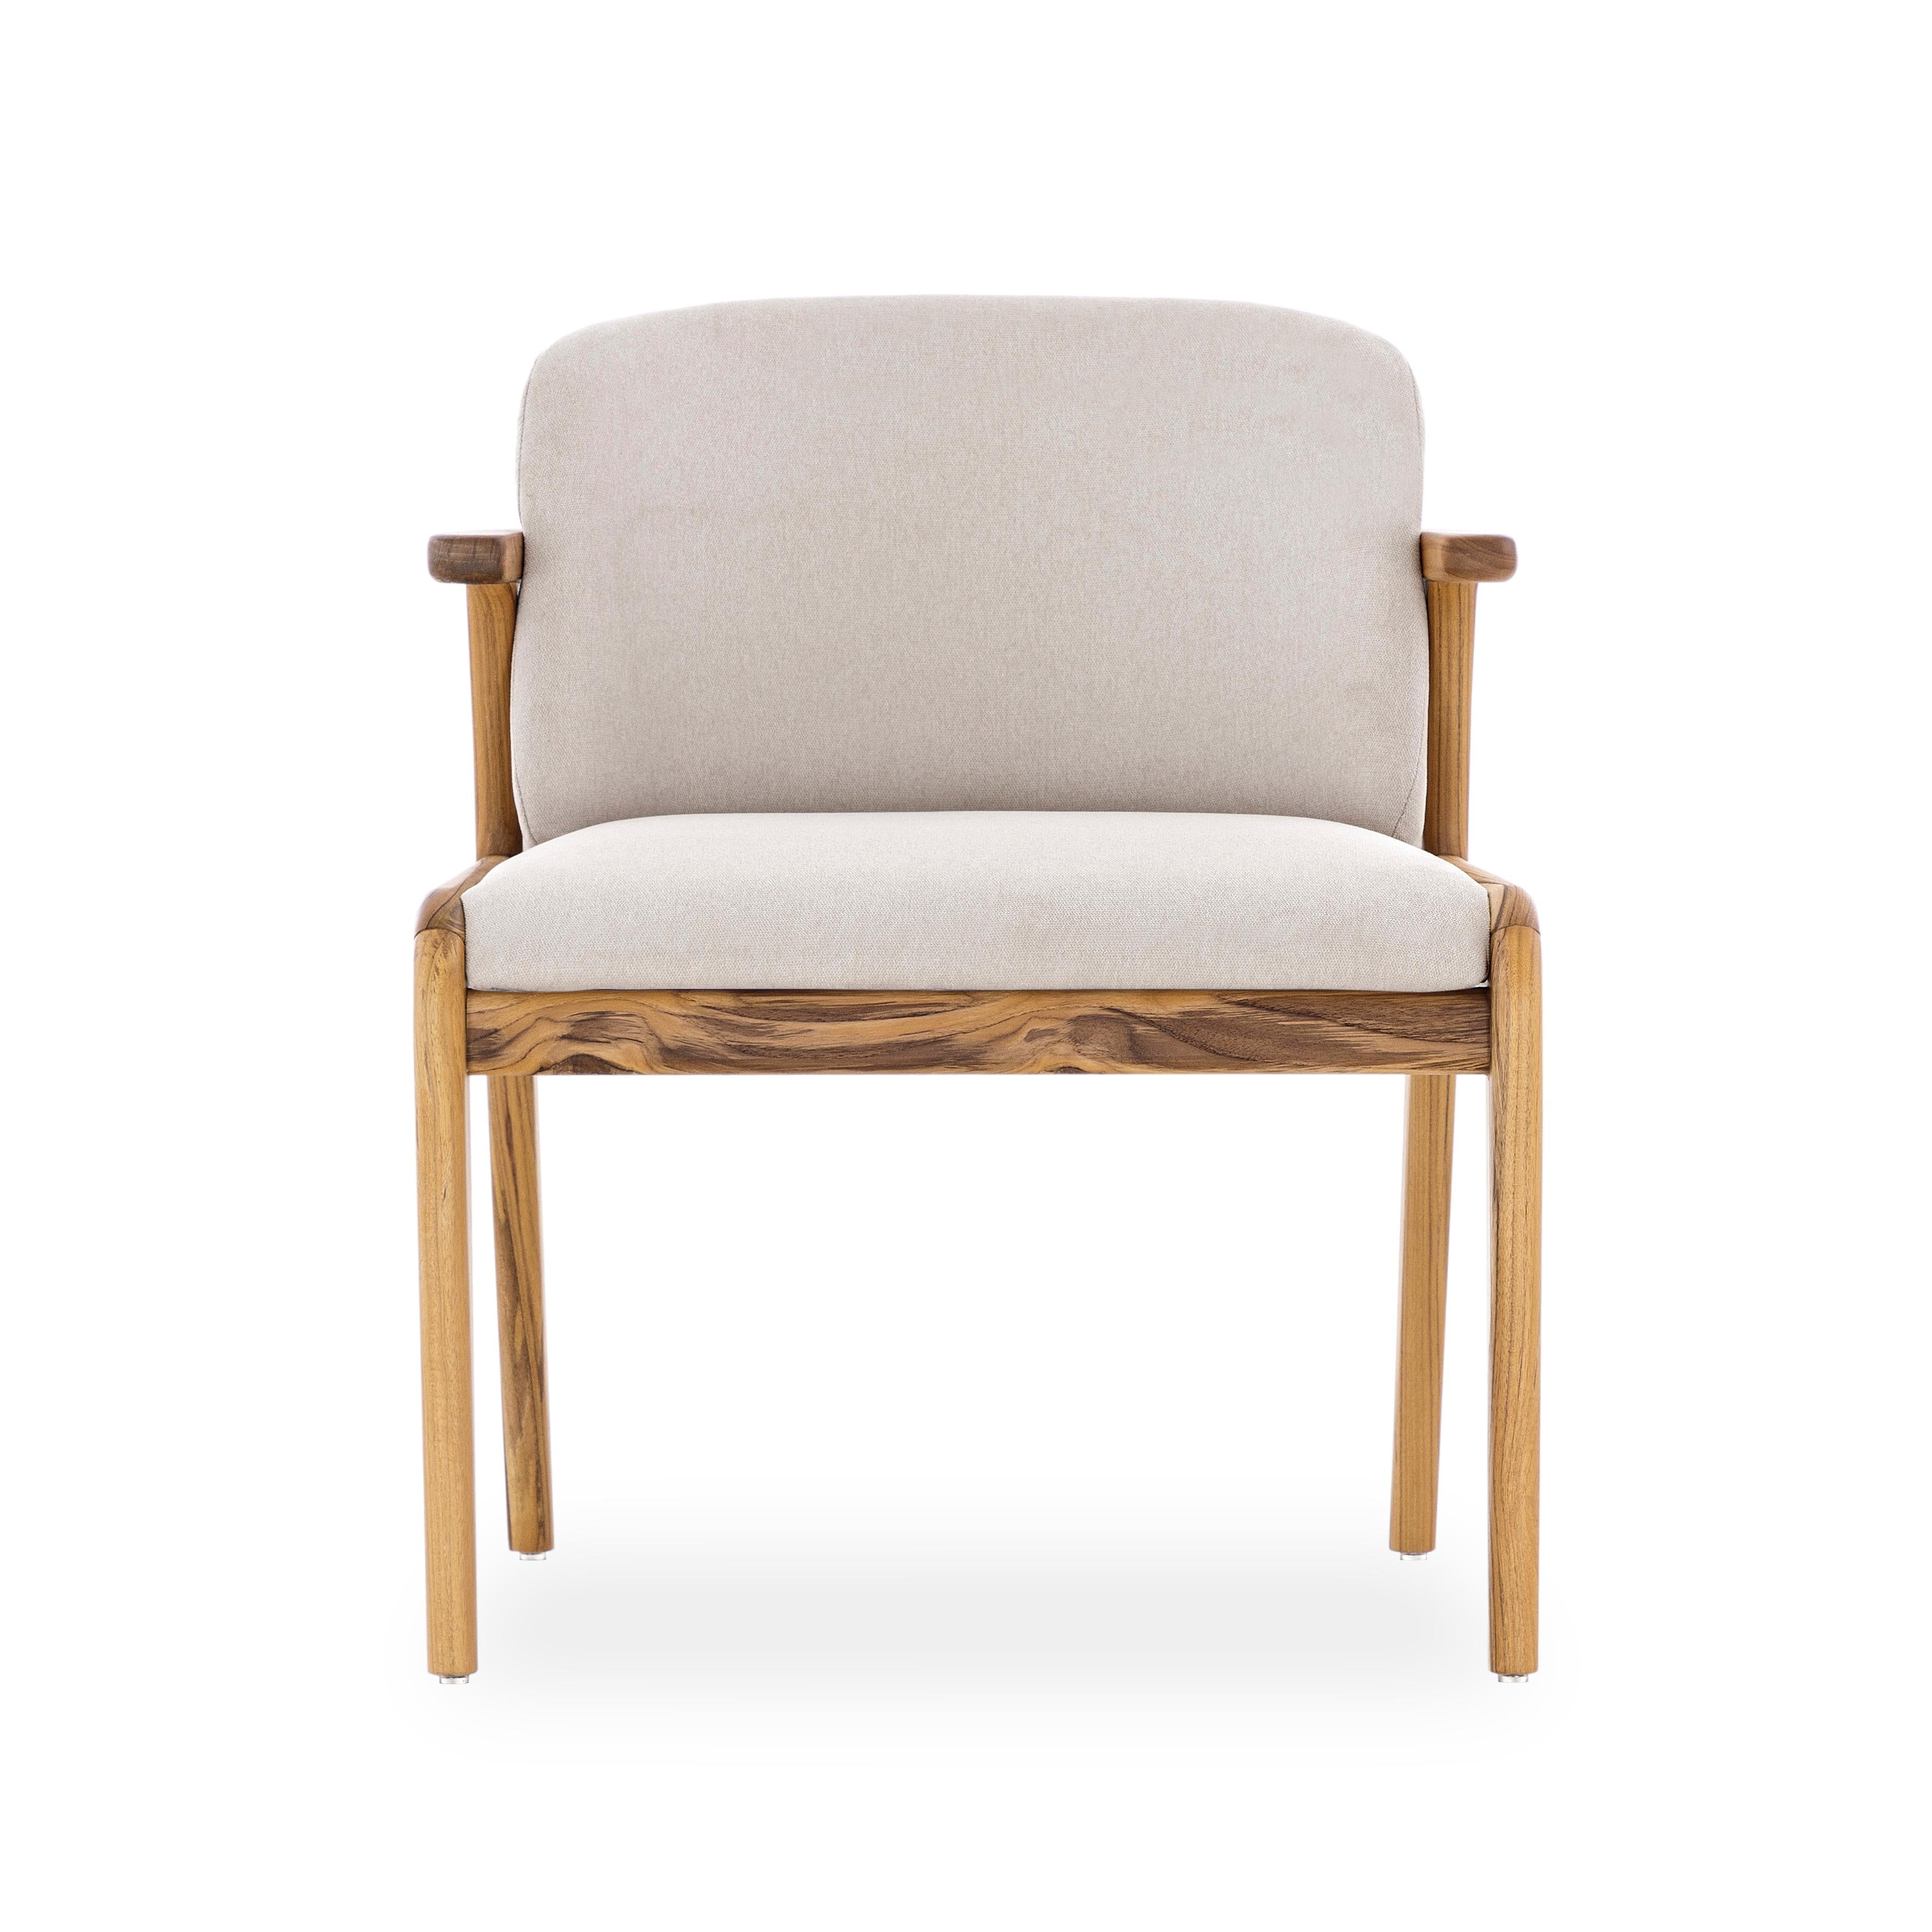 Upholstery Nowe Dining Chair in Teak Wood Finish and Beige Cotton Fabric For Sale